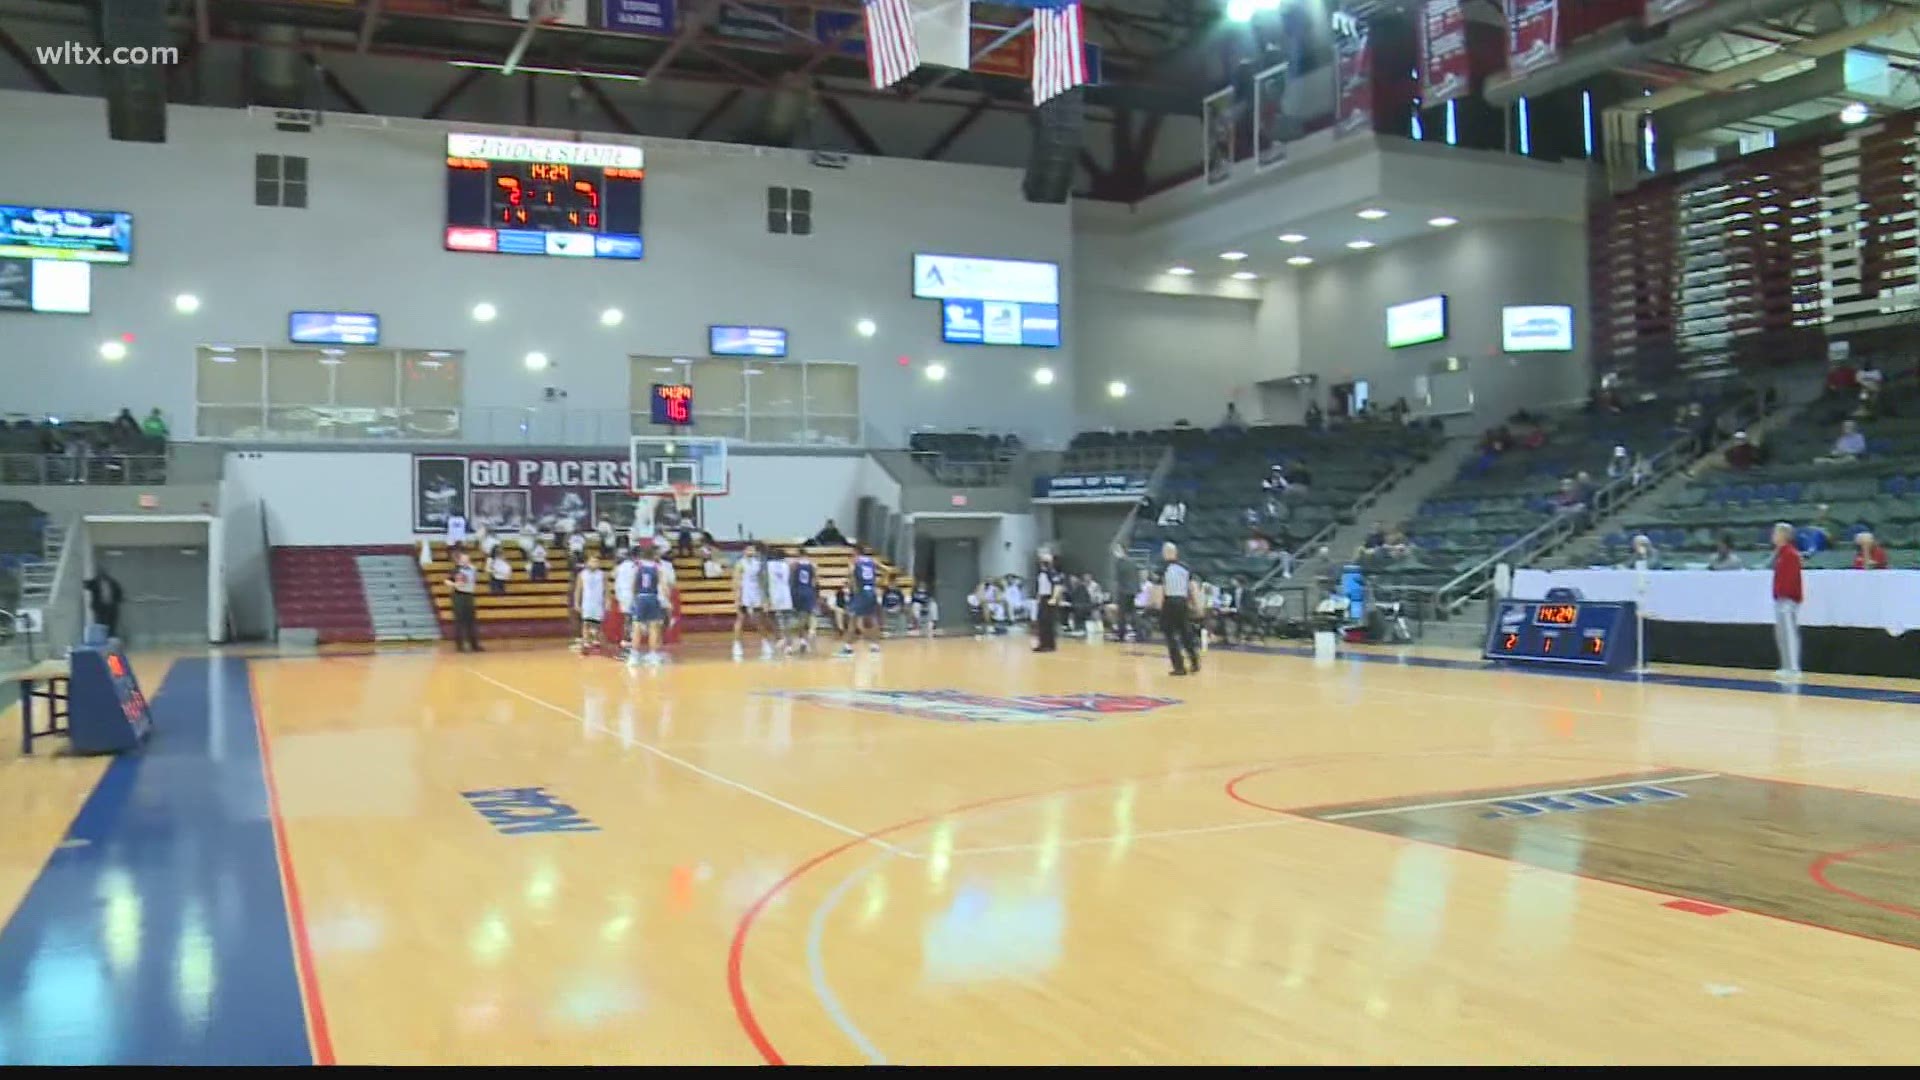 Basketball takes center stage at the USC Aiken Convocation Center